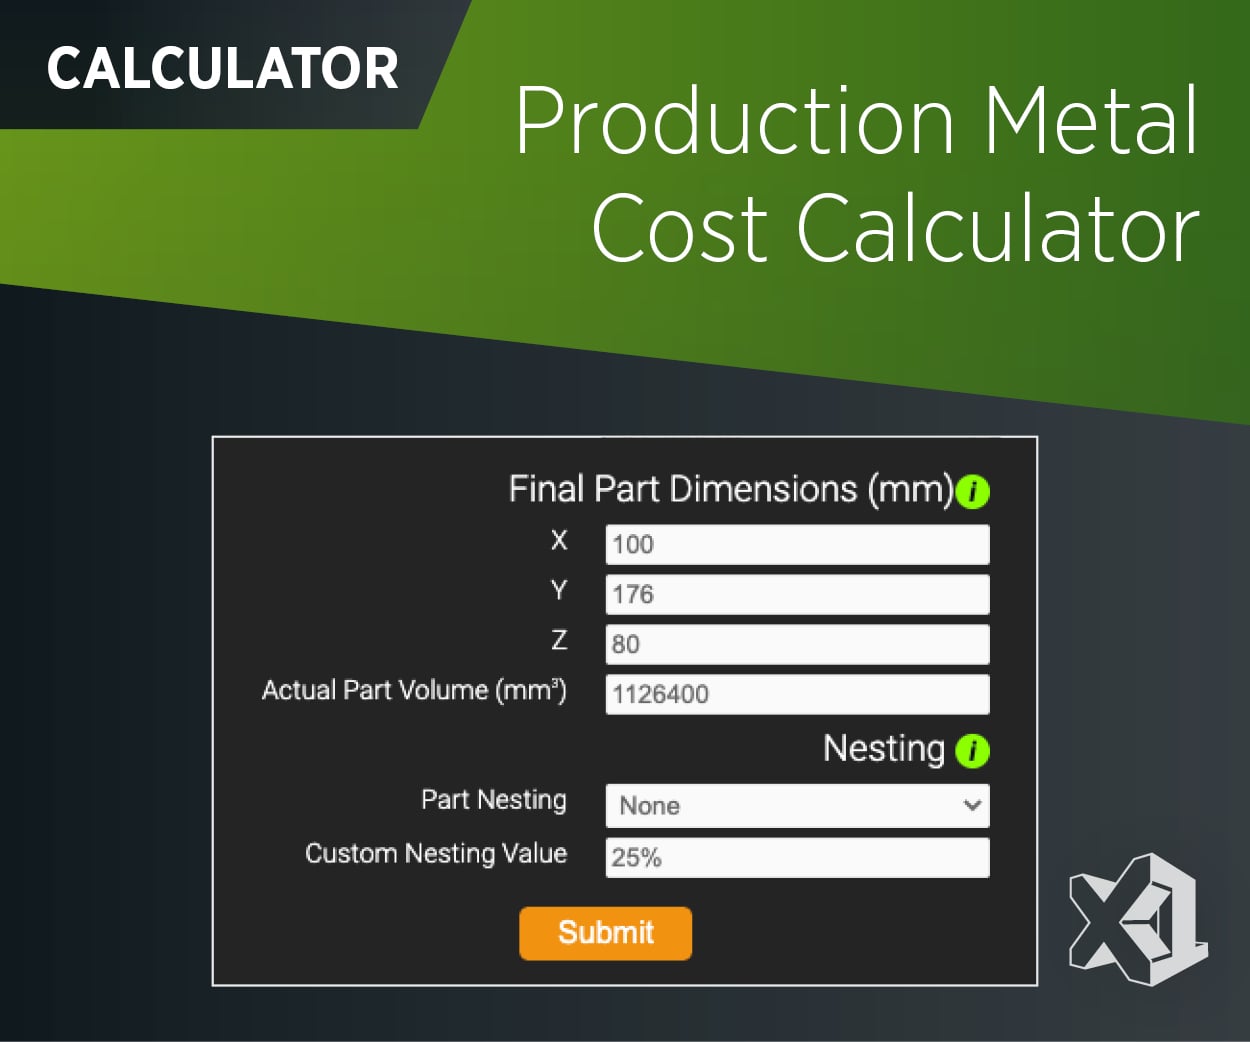 The ExOne Production Metal Cost Calculator